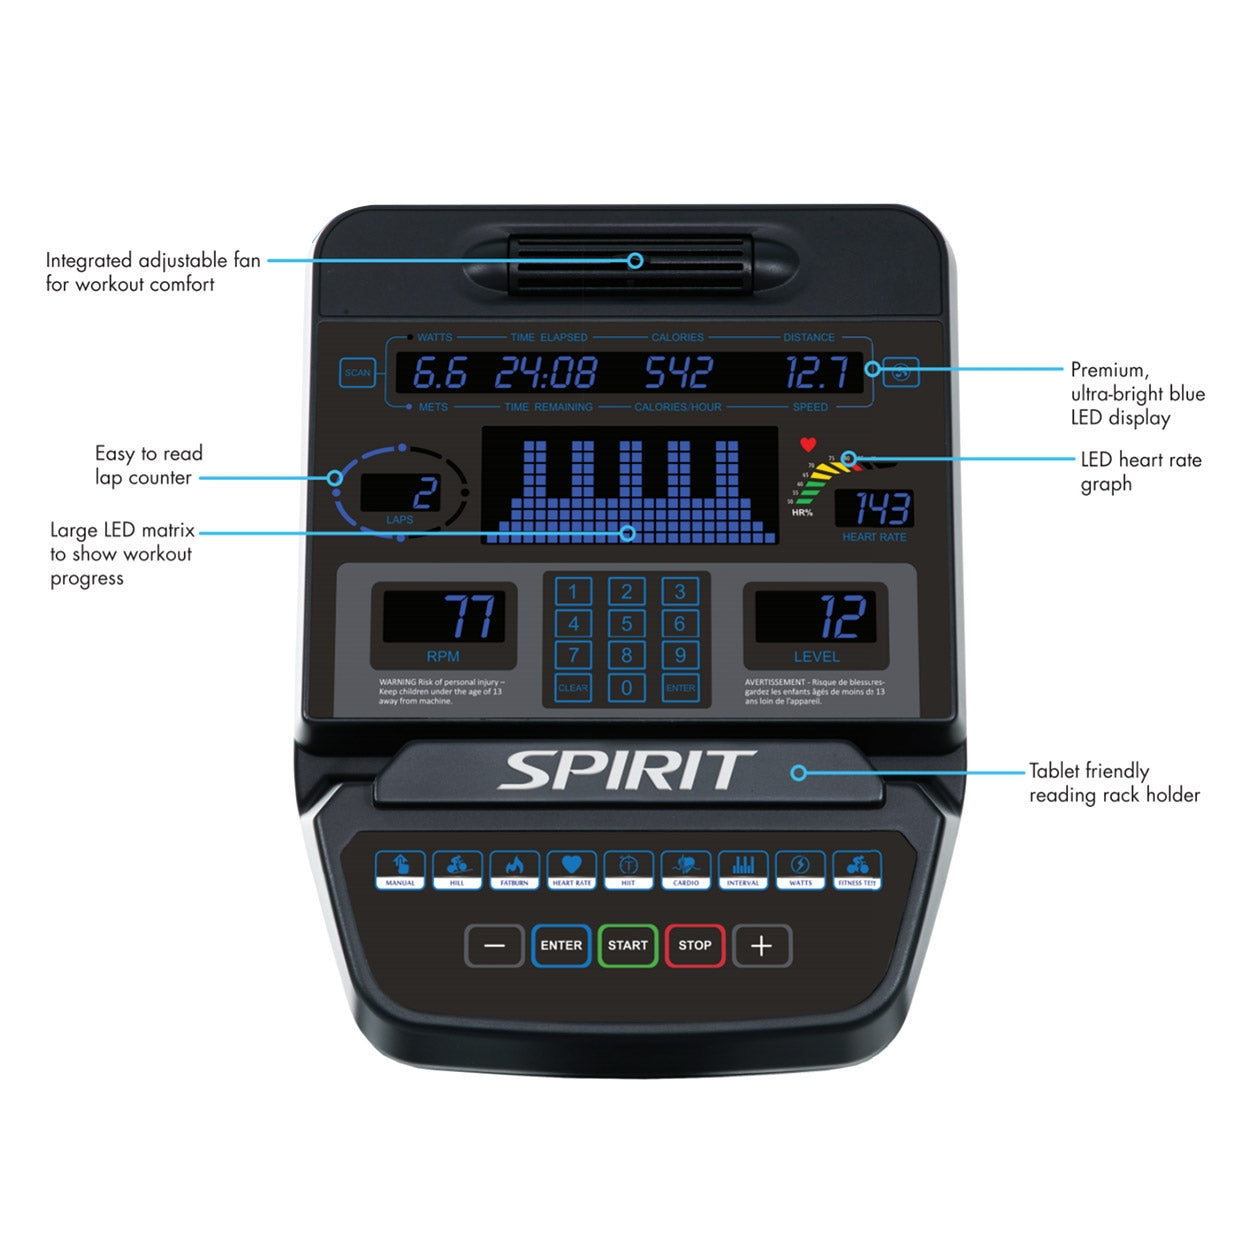 the console of a recumbent cycle fitness machine with features